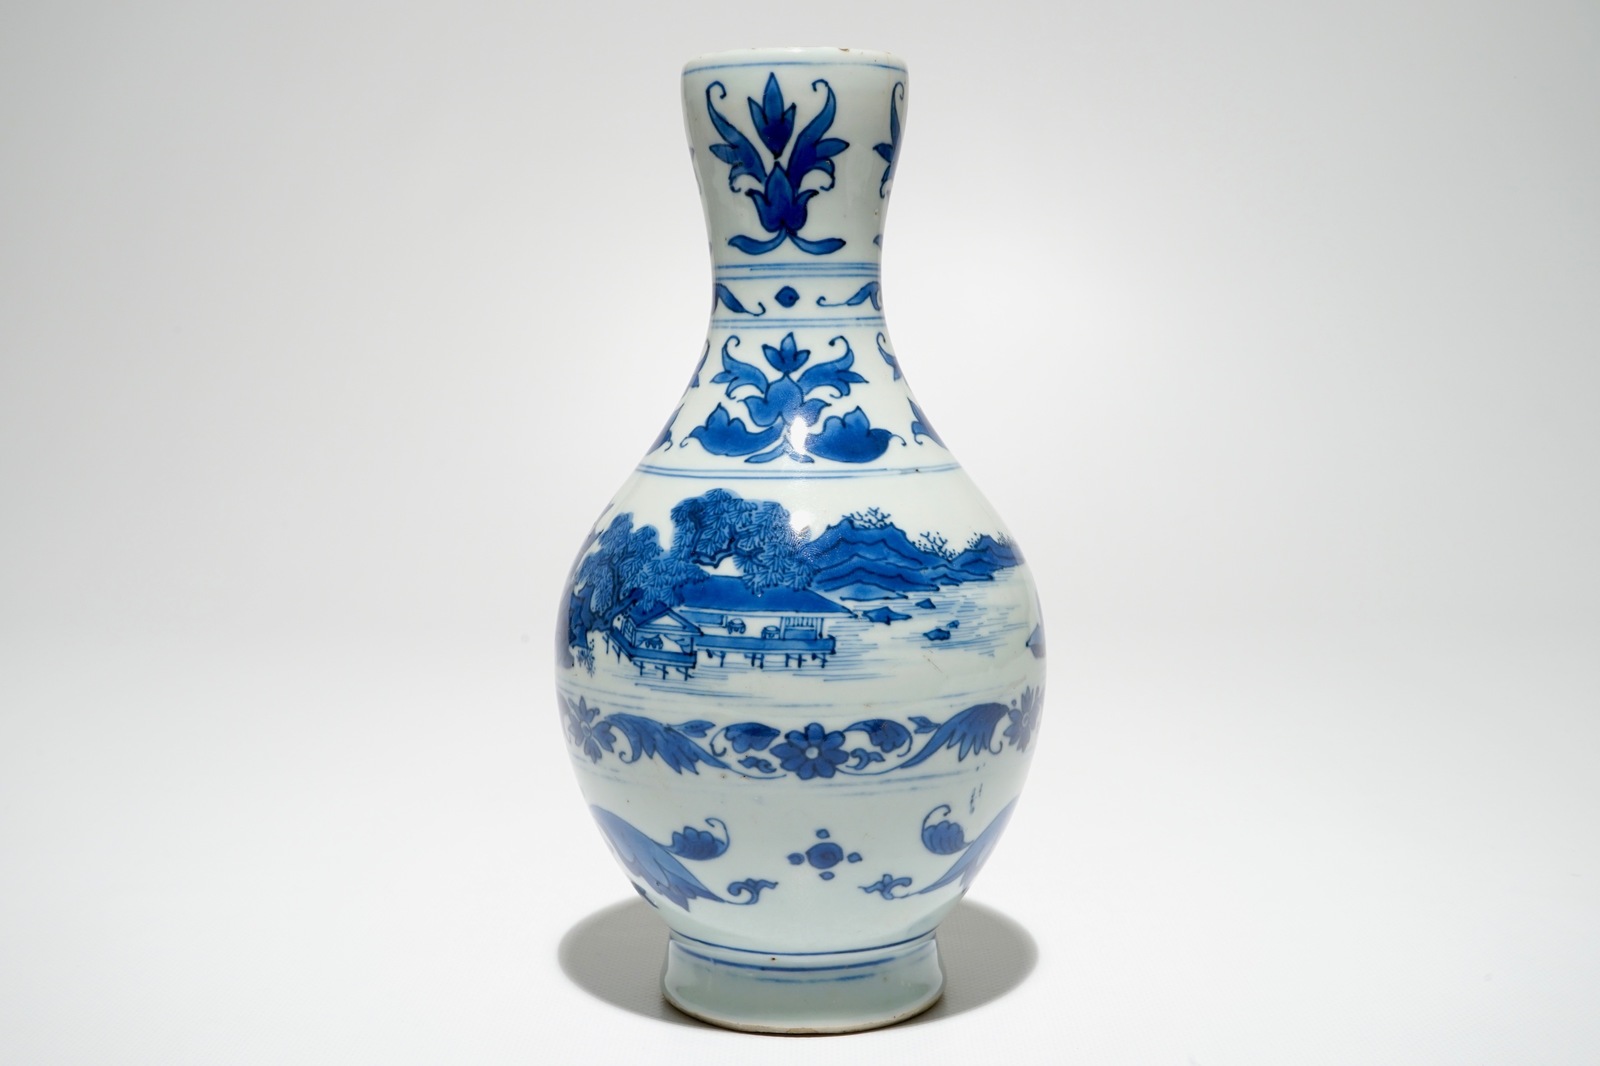 A Chinese blue and white jug with landscape design, Transitional period, Chongzhen H.: 24 cm - Image 3 of 7